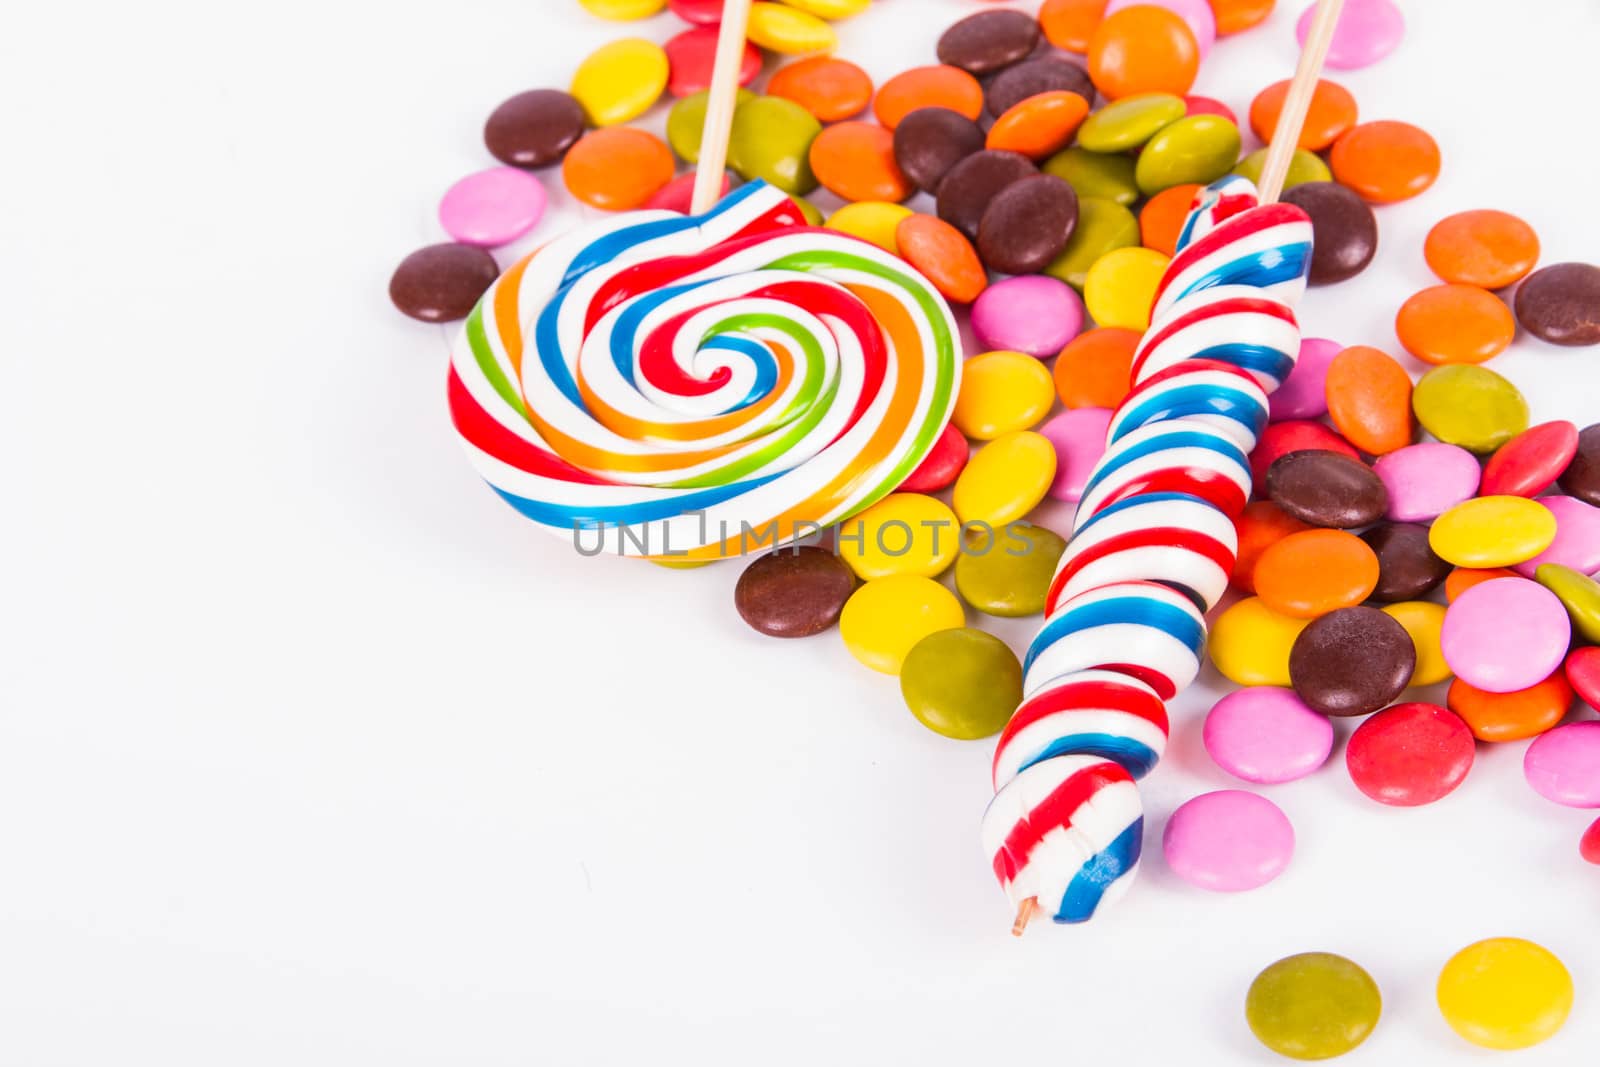 Colorful spiral lollipop candy on stick and little sugars with copy space, isolated on white background.